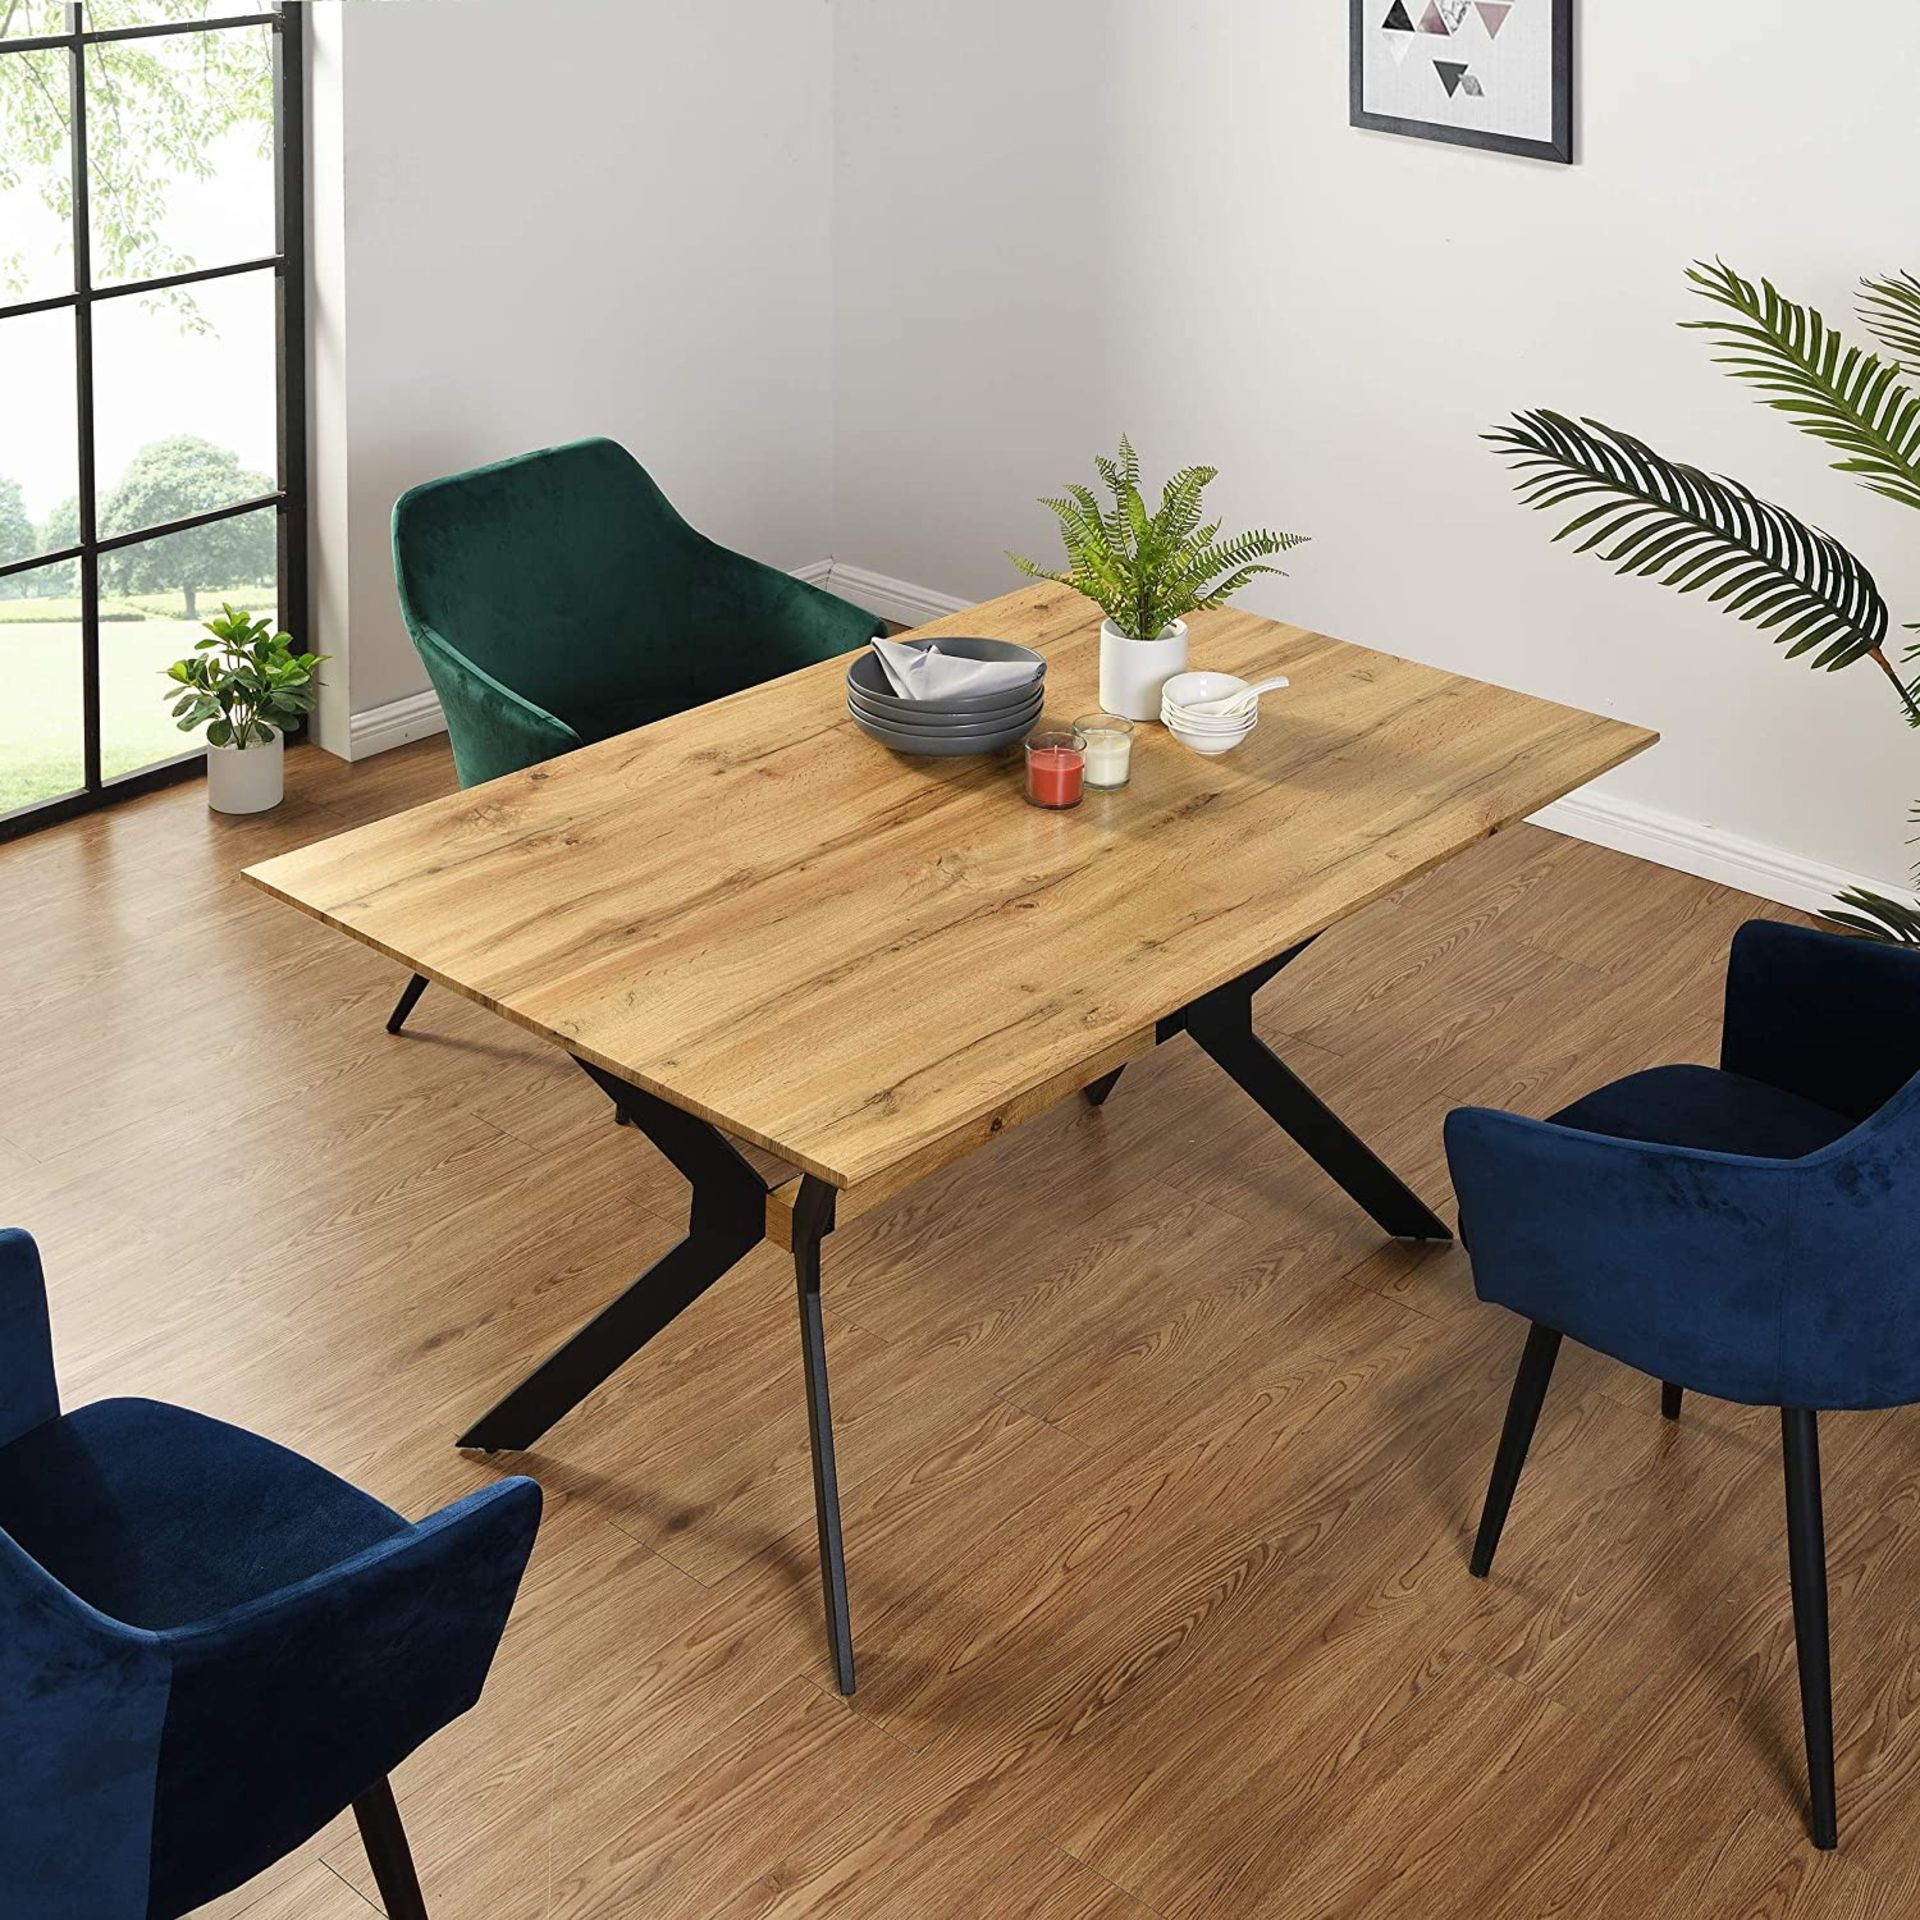 Granby Wotan Oak Effect 140cm Dining Table with Geometric Metal Legs *ONLY CONTAINS BOX 1/2* -